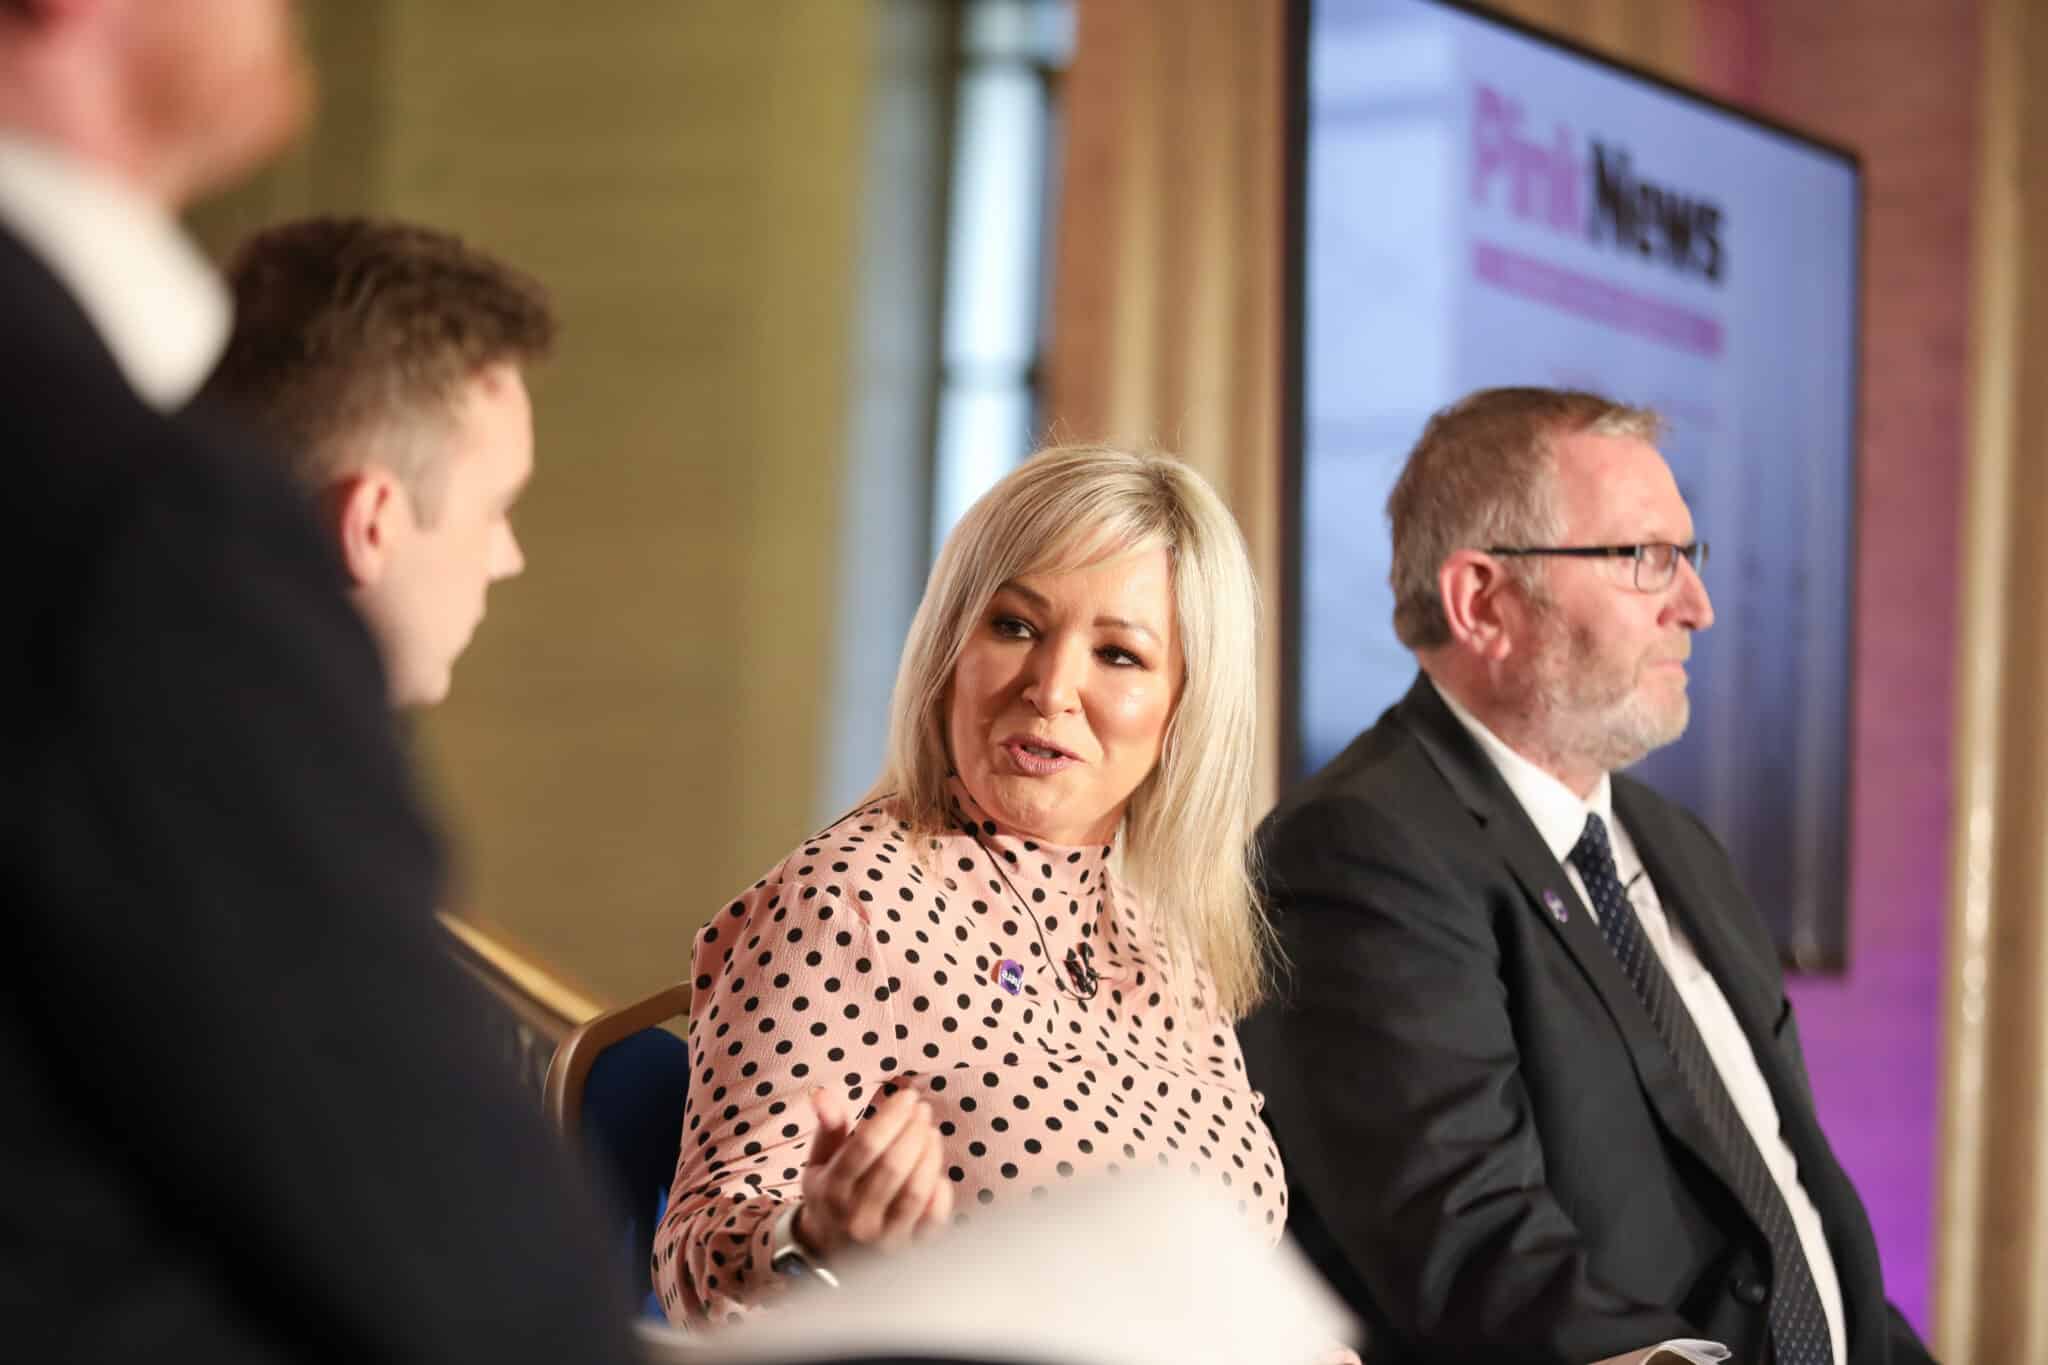 Michelle O'Neill taking part in a panel discussion in Stormont on LGBTQ+ rights. 